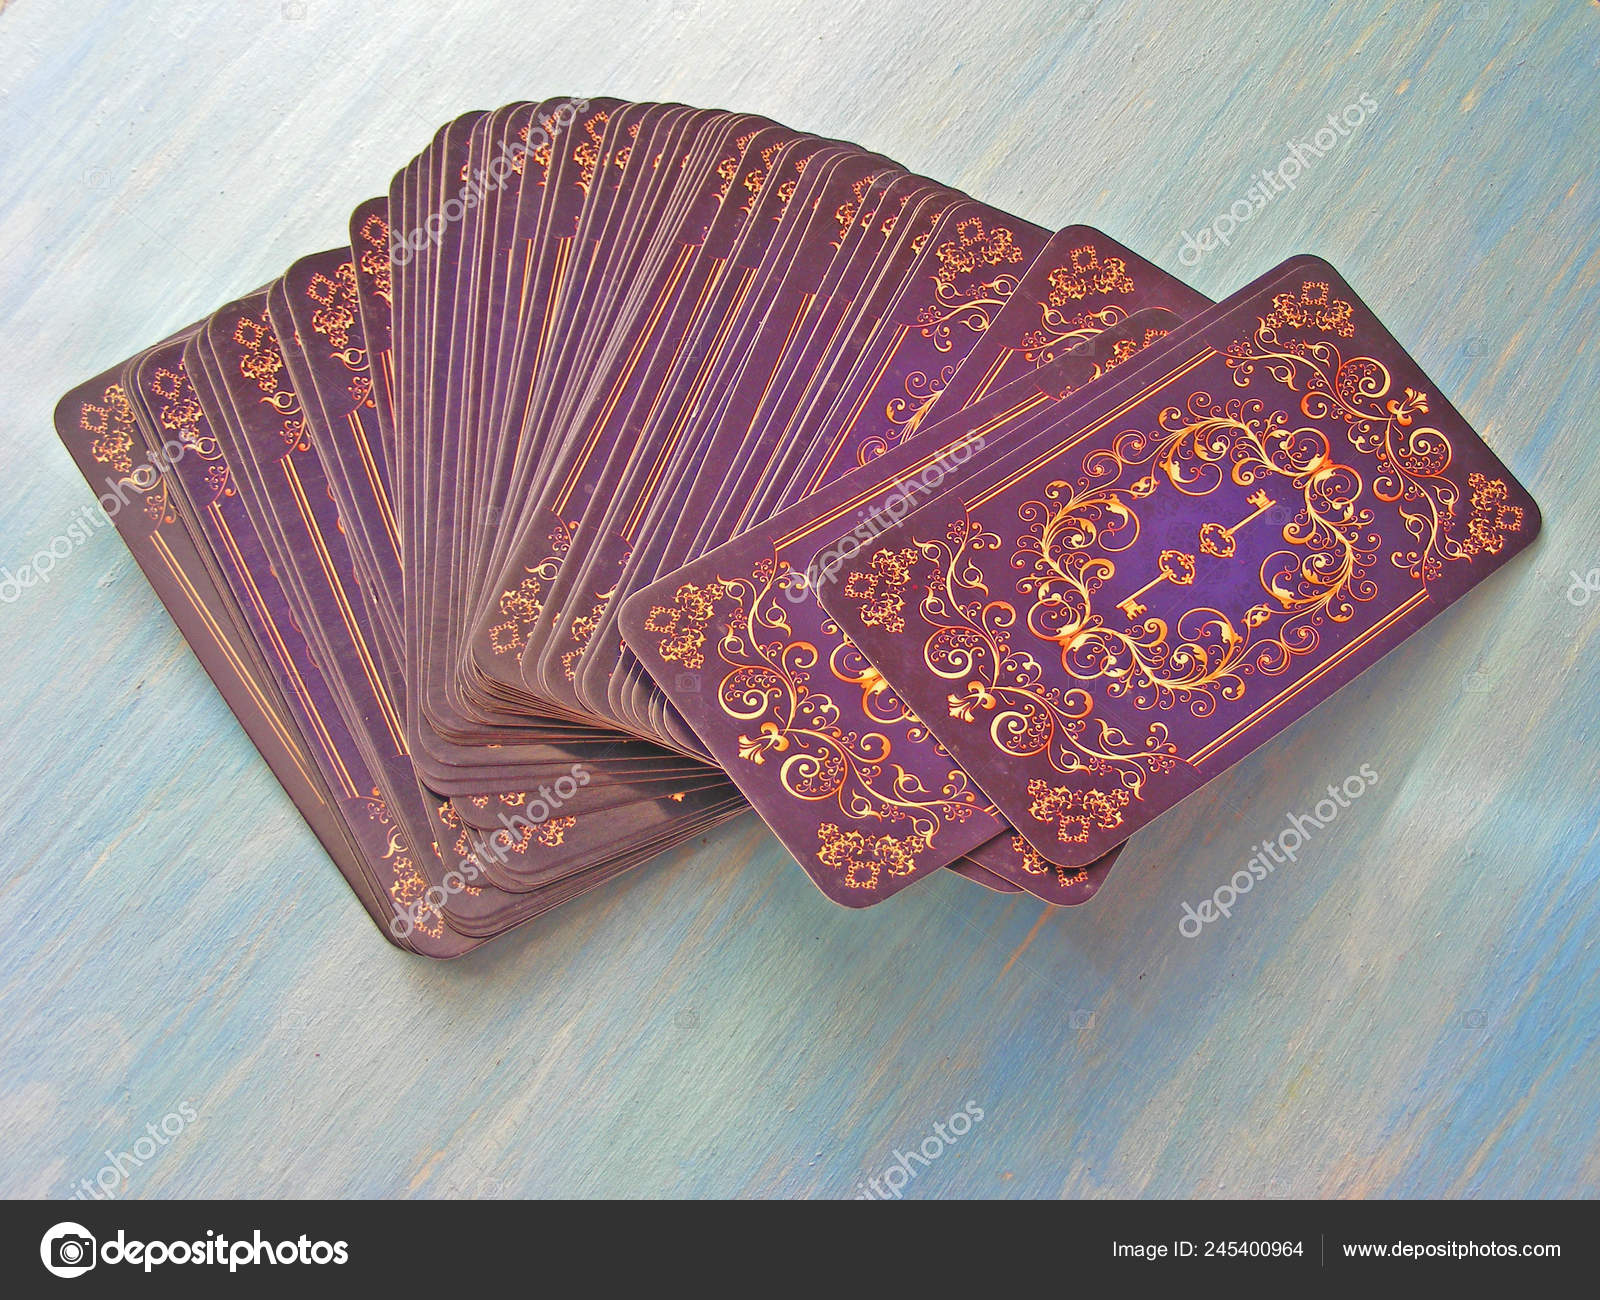 Tarot Cards Medieval Symbol Back Design Isolated Blue Wooden Background  Stock Photo by ©annafrby 245400964